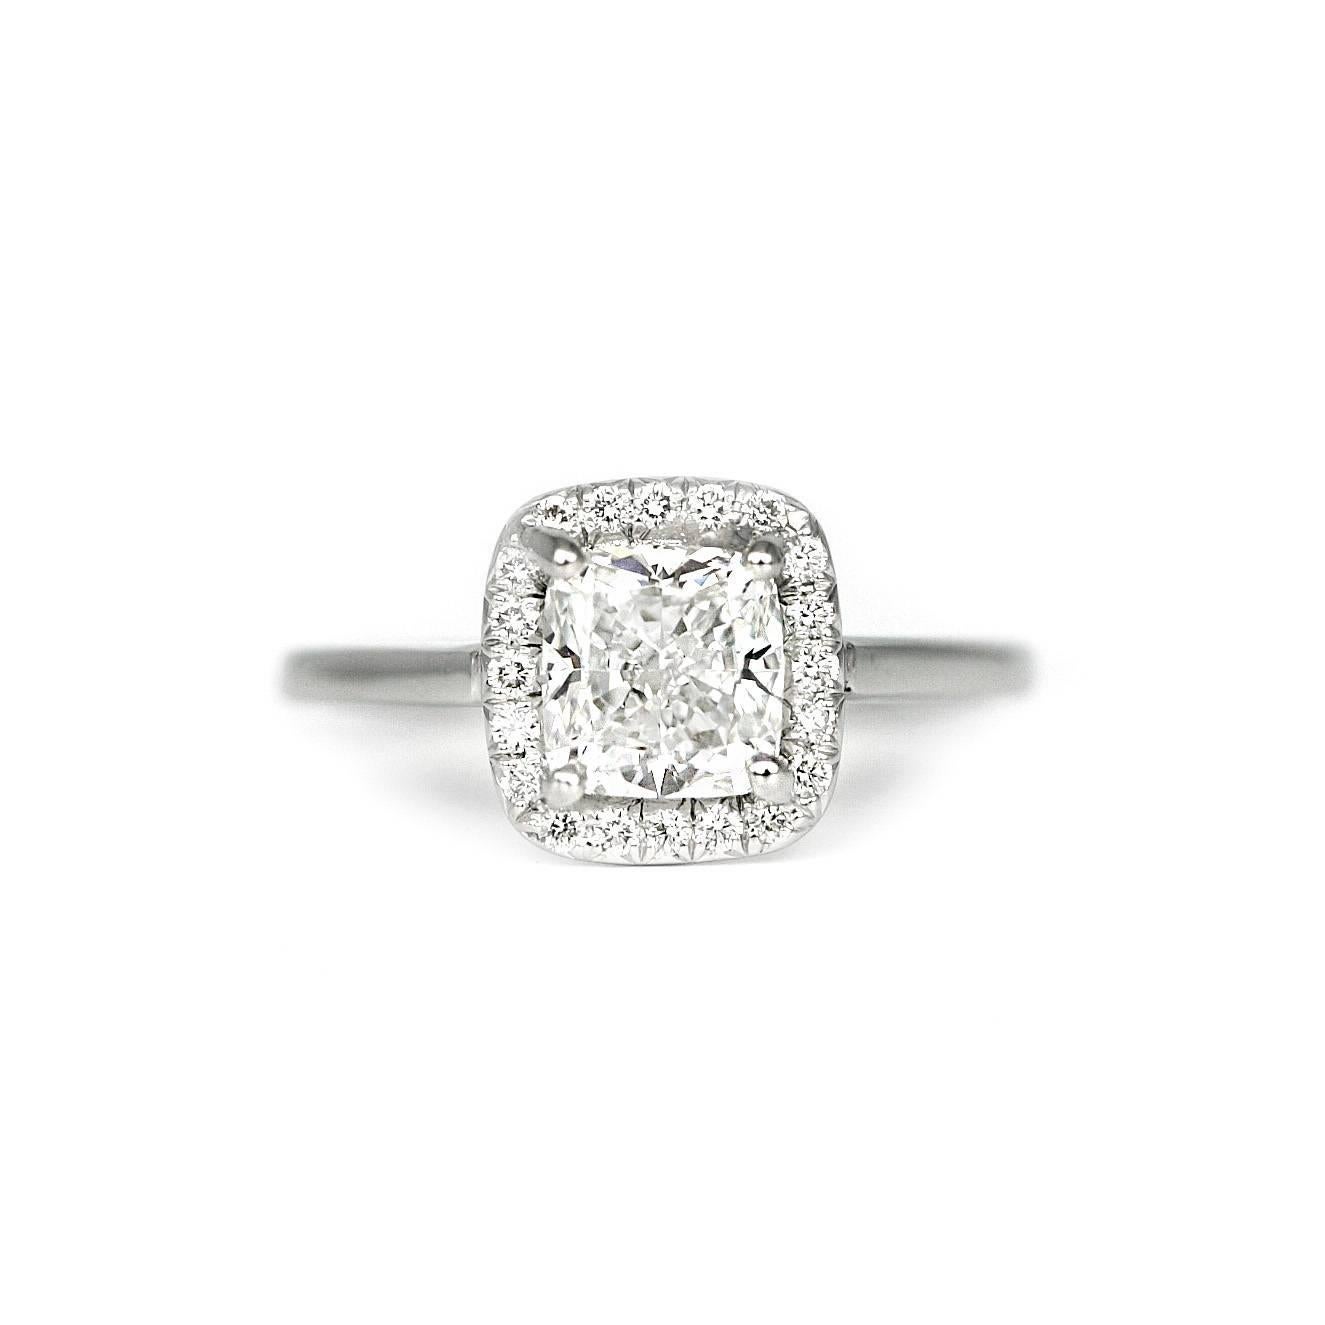 Cushion cut diamond weighing 1.50 carats with a Gia Certificate 512138730
F/ VS 2. Set in a platinum halo mounting with  20 diamonds weighing .15 carats. Size 6 1/4, easily resized. 